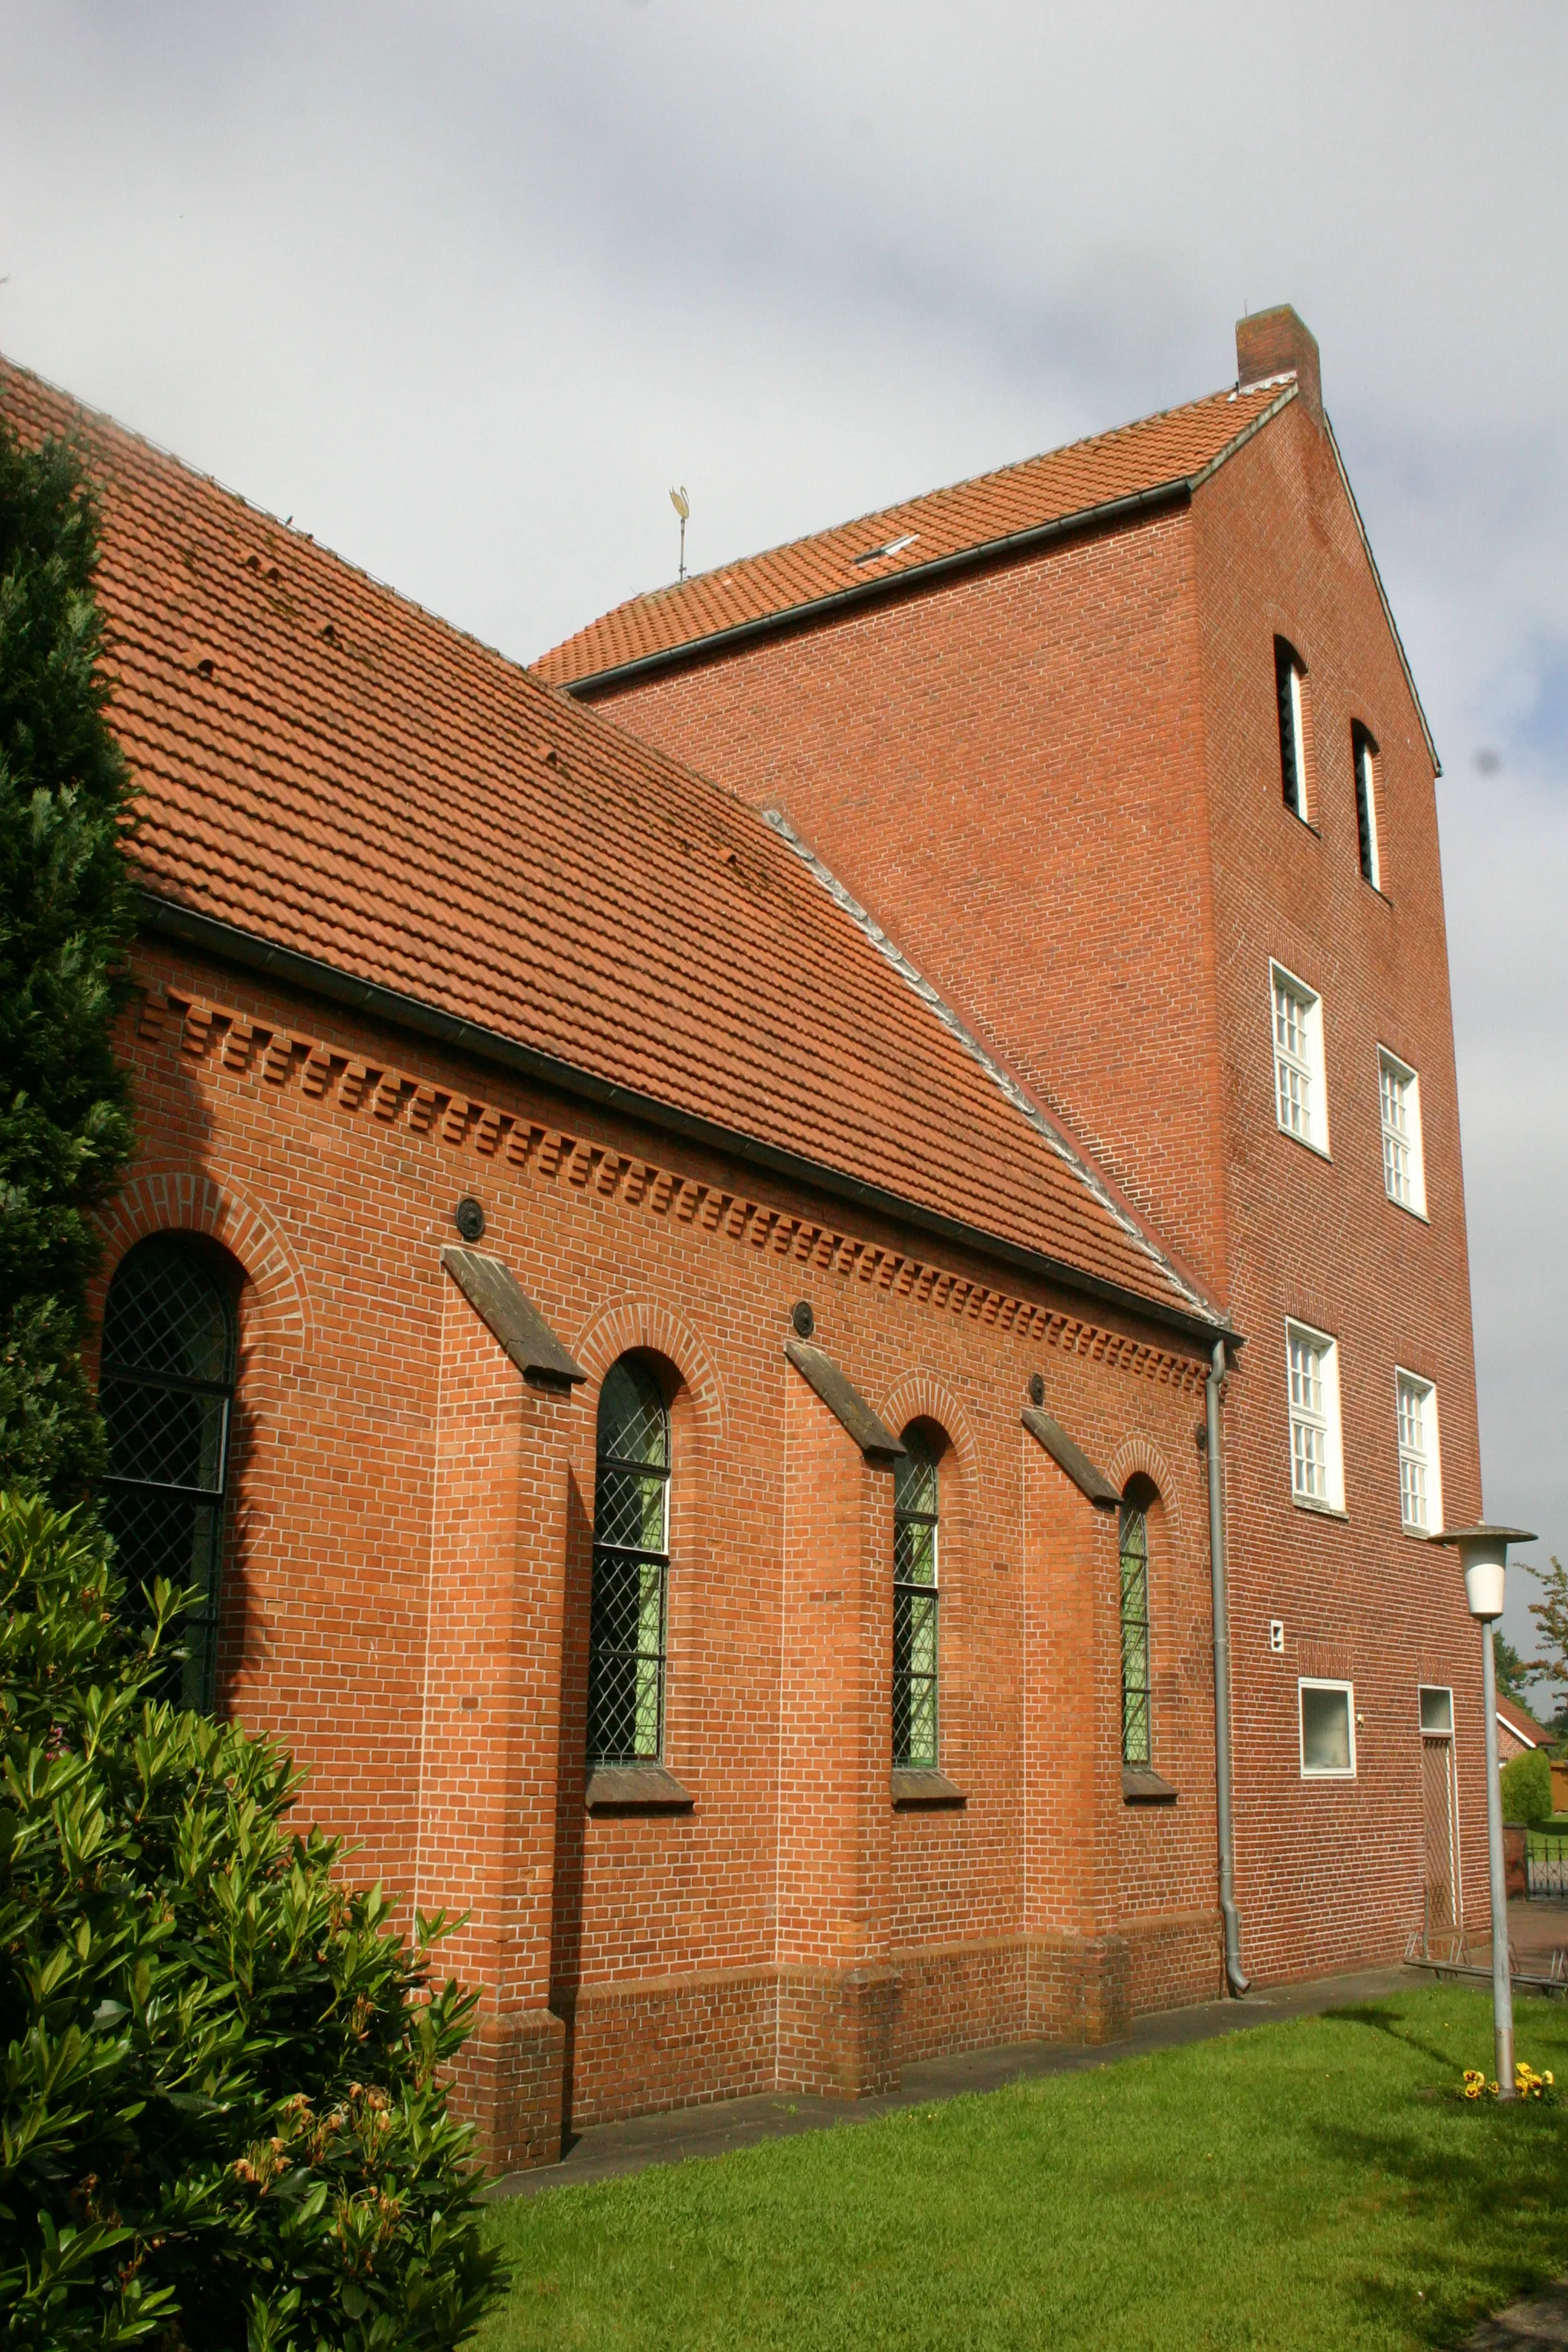 Photo showing: Historic Trinity Church in Ostrhauderfehn, district of Leer, East Frisia, Germany